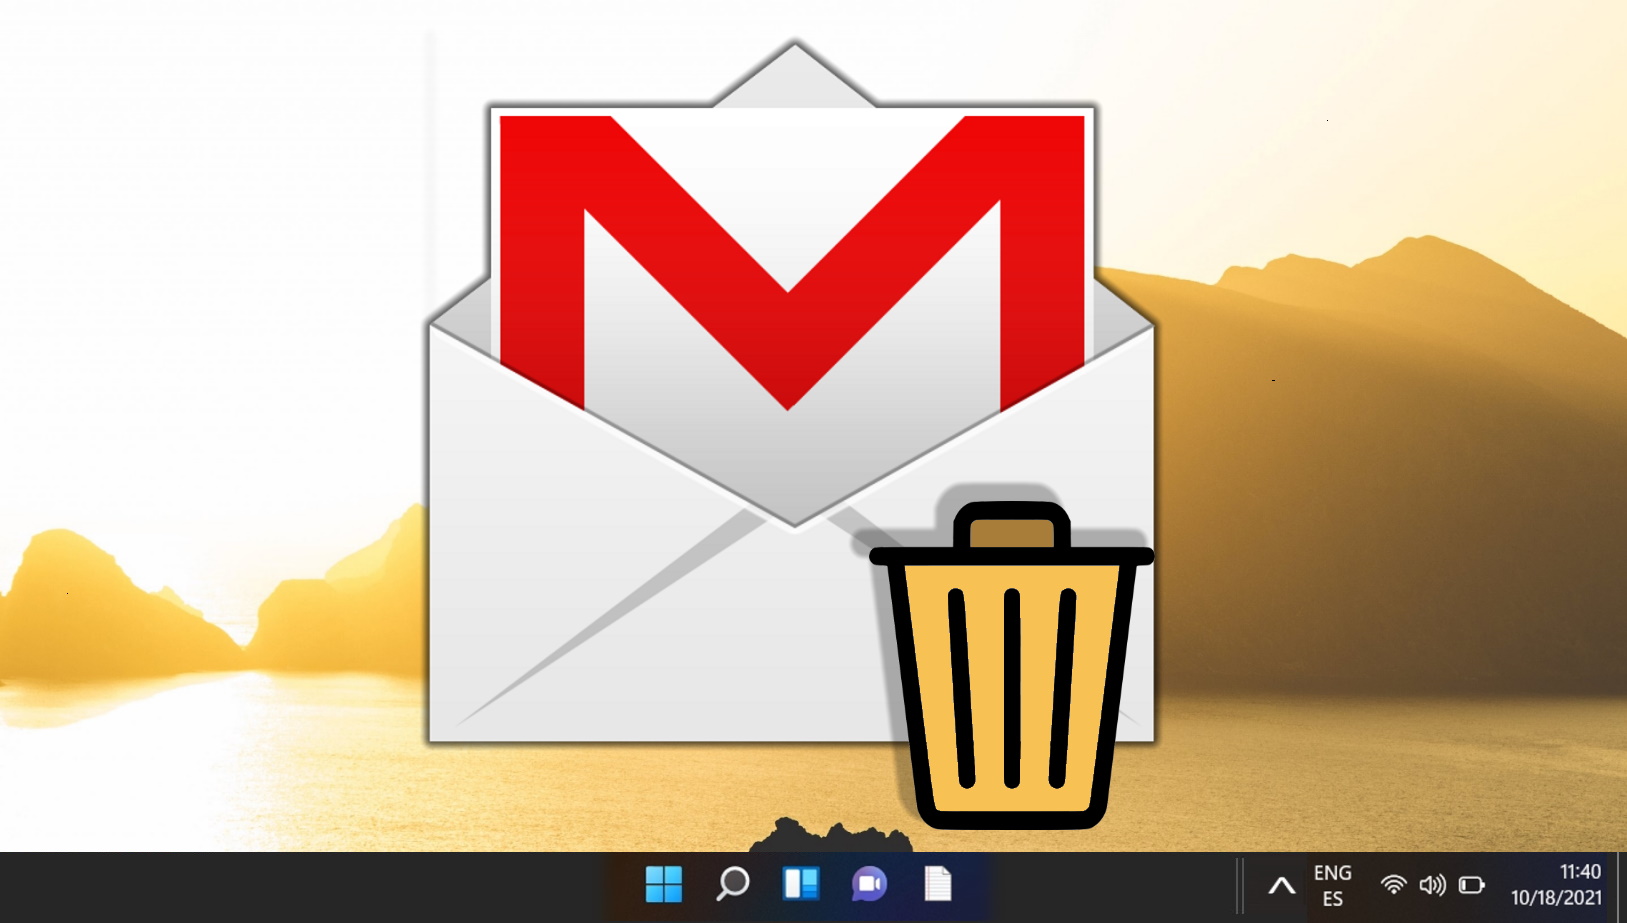 How to quickly delete or archive thousands of unread emails in Gmail